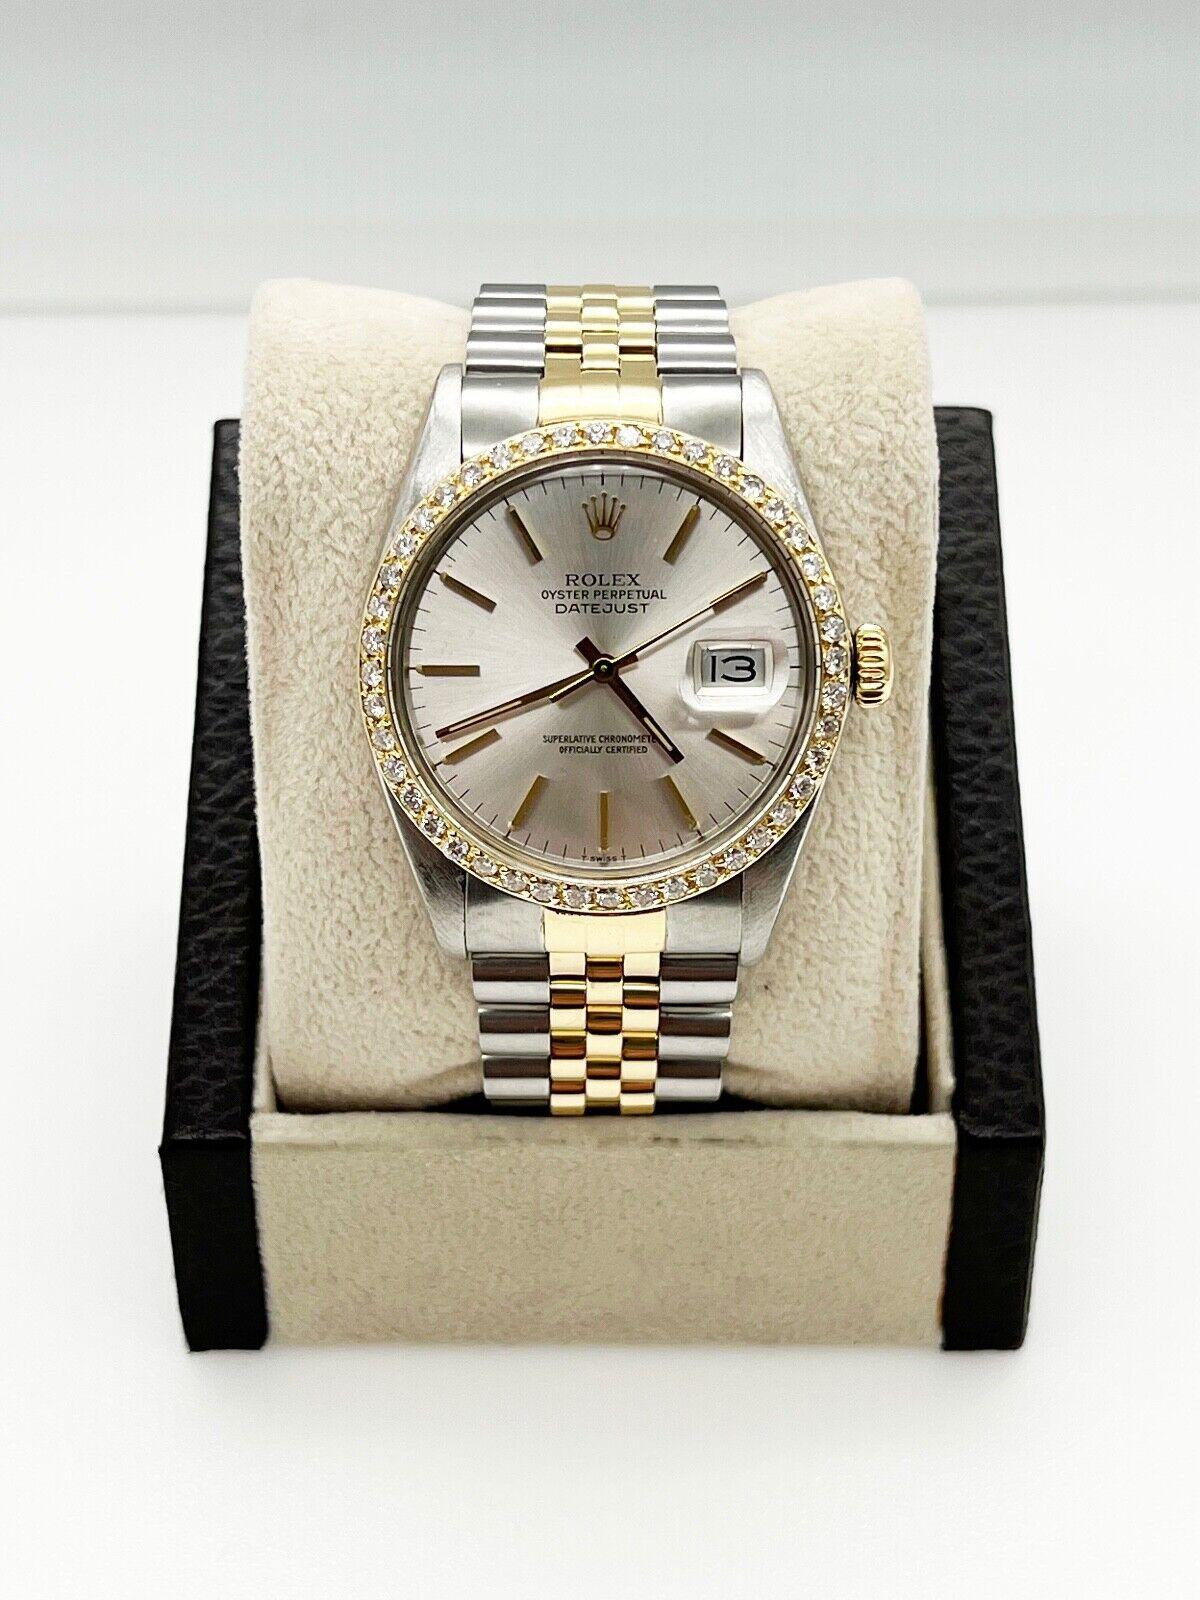 Style Number: 16013

Serial: 8361***

Year: 1986

Model: Datejust 

Case Material: Stainless Steel 

Band: 18K Yellow Gold & Stainless Steel 

Bezel: Custom Diamond Bezel 

Dial: Silver Dial 

Face: Acrylic 

Case Size: 36mm 

 Includes: 

-Elegant